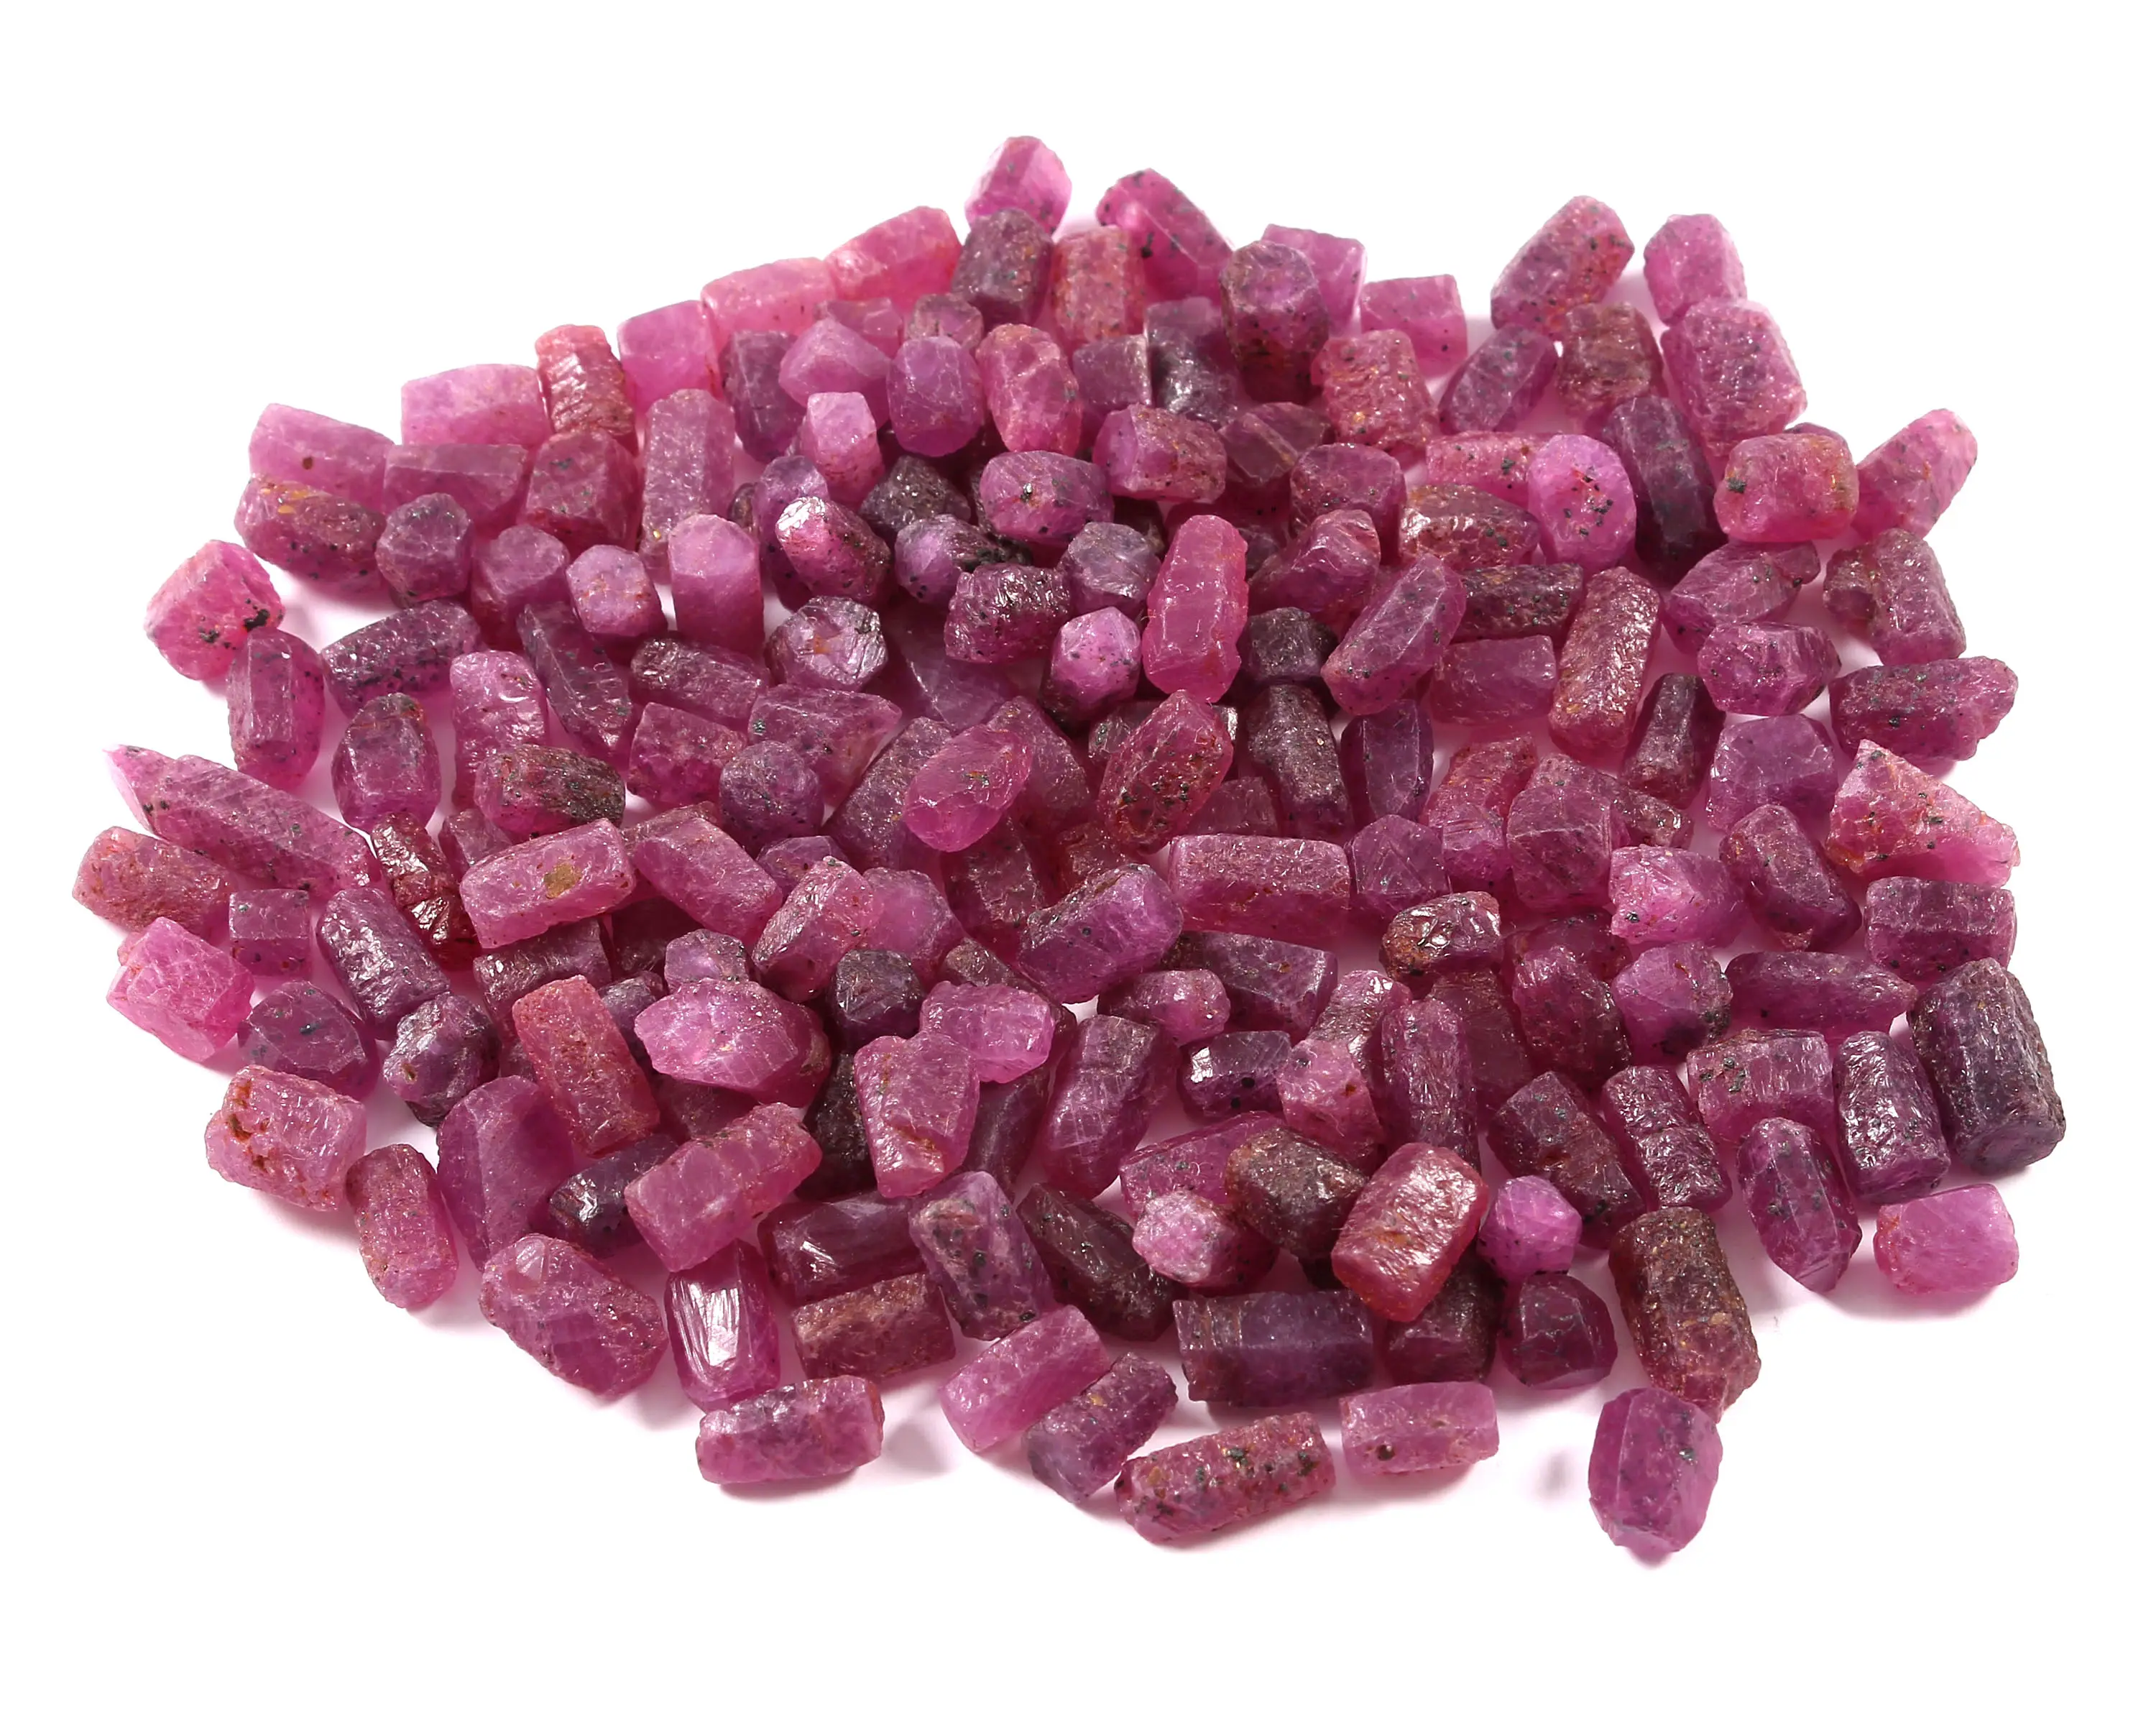 Natural Ruby Rough Precious Ruby Sticks Raw Stones Healing Crystal Wiccan Rocks Minerals Fine Quality